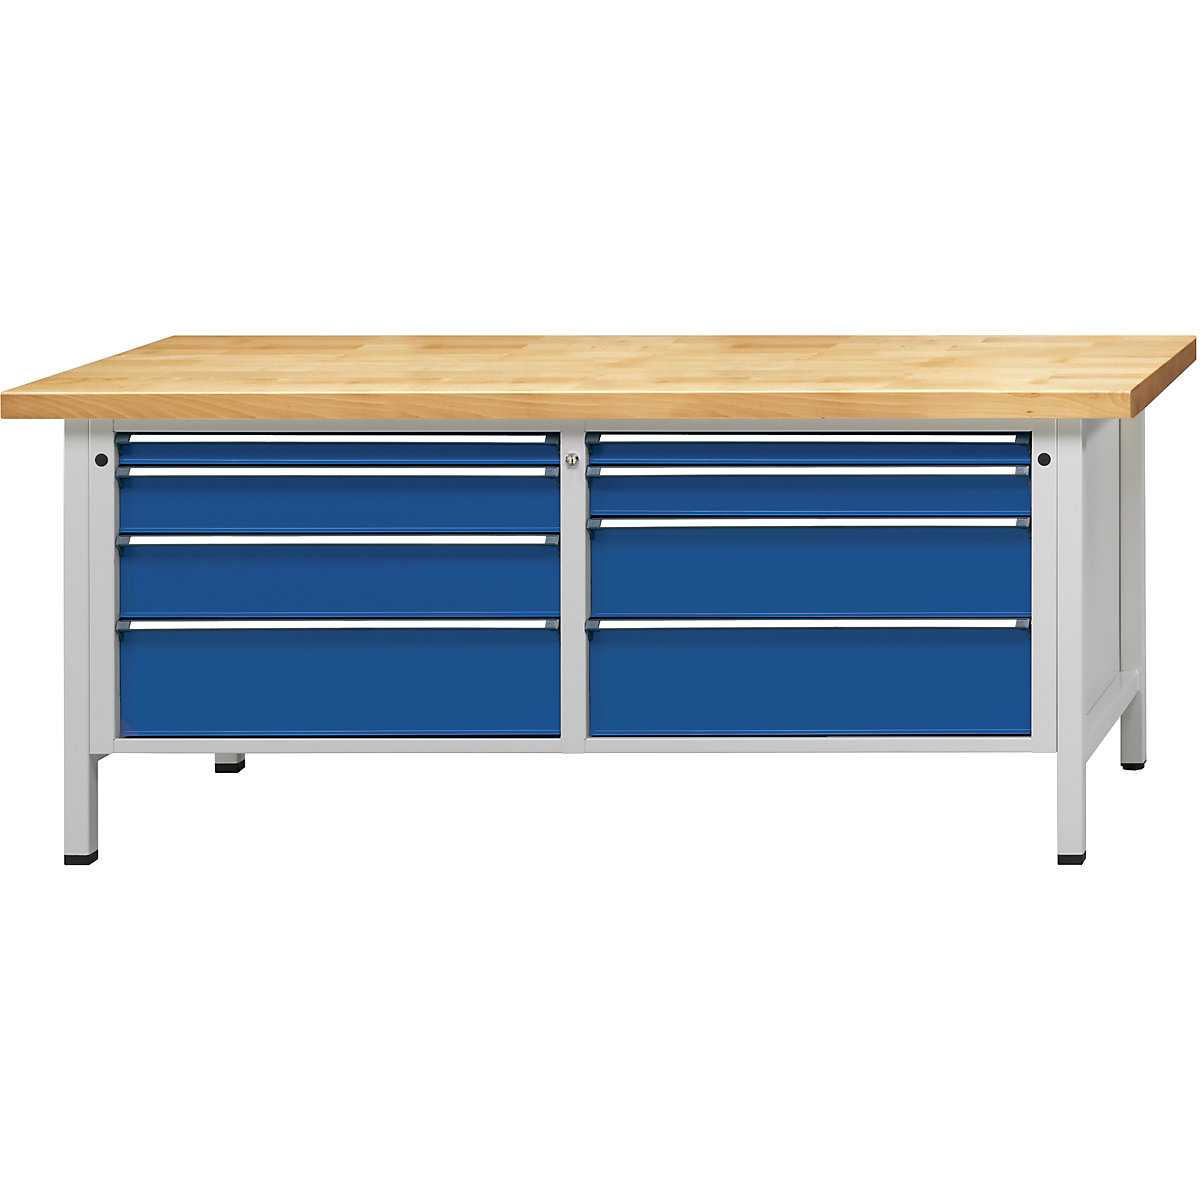 Workbenches 2000 mm wide, frame construction – ANKE